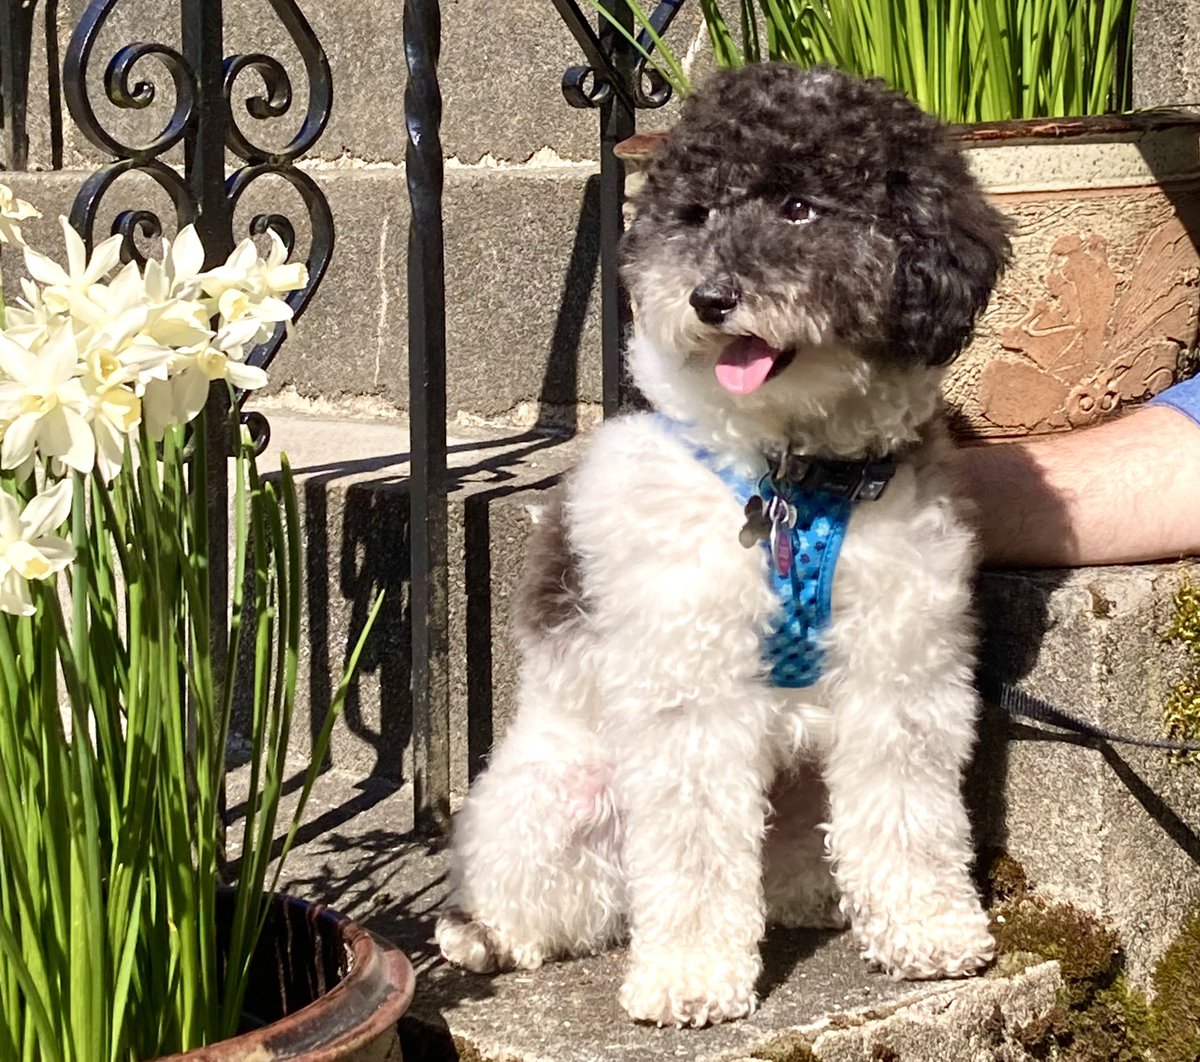 #AdoptAShelterPetDay Niko, a puppy farm survivor, has been with us here on Vancouver Island for six months. He’s learned to live without fear, and taught us vital lessons about courage and the enduring power of love ❤️🐾